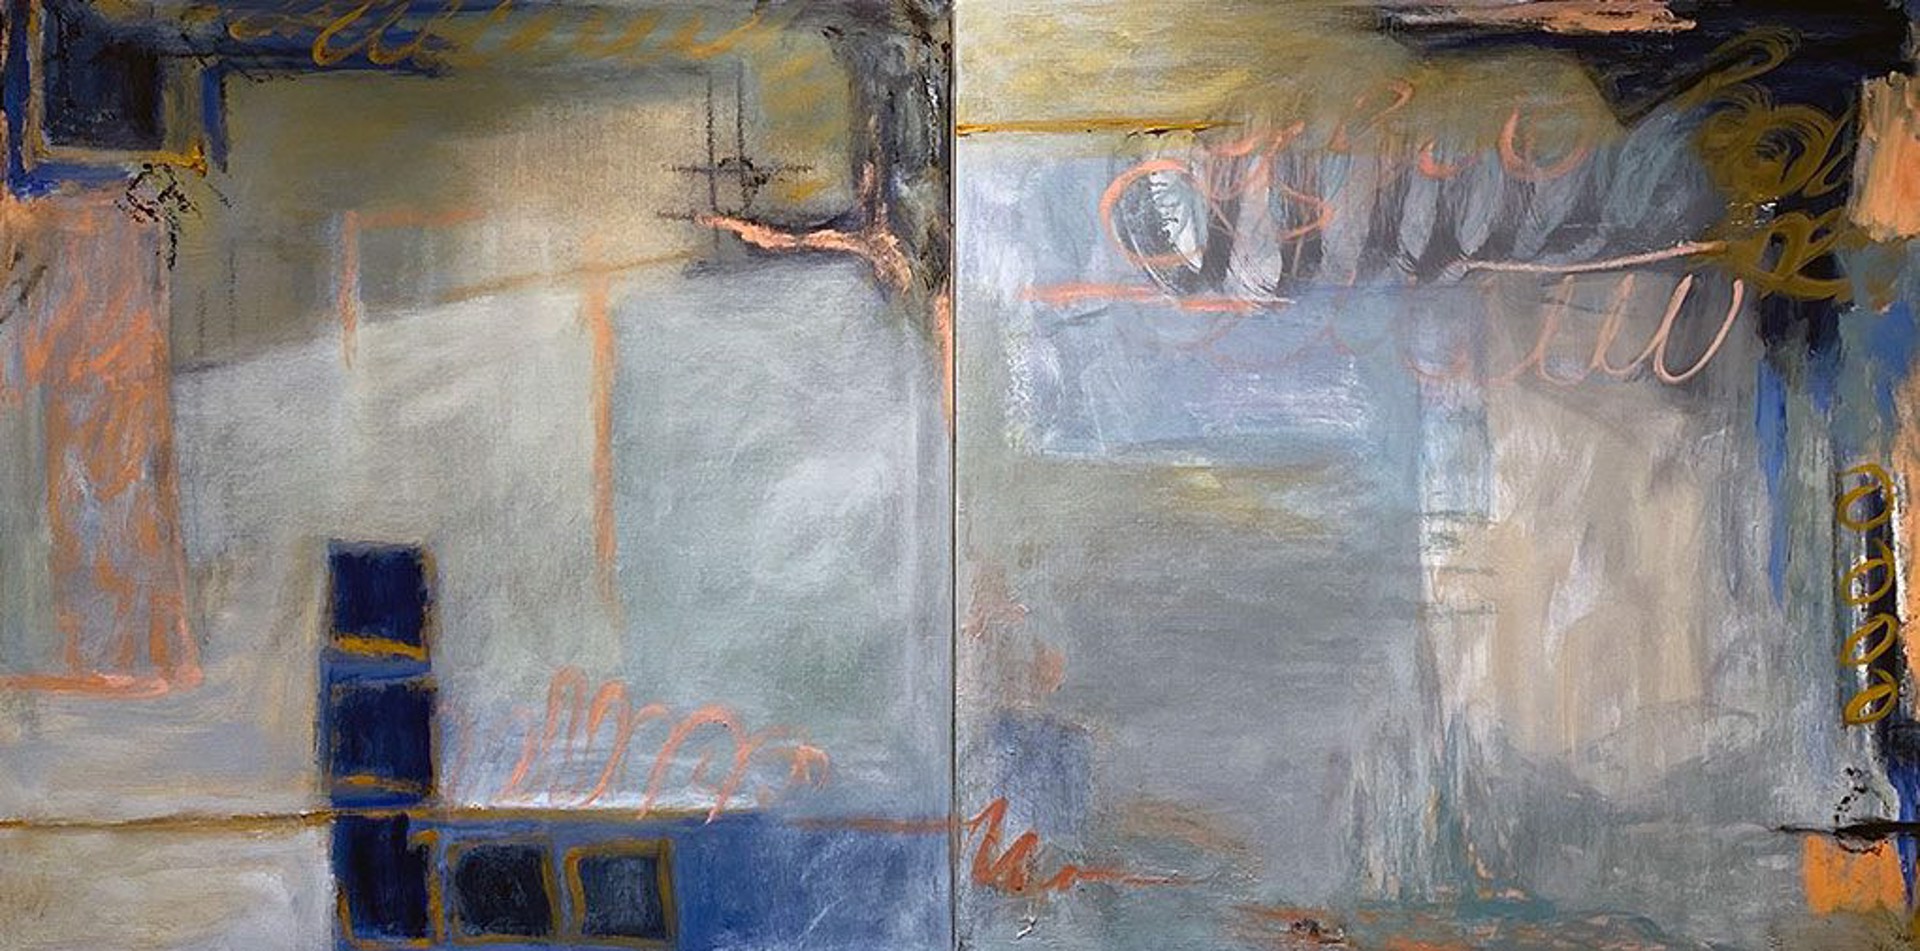 Just Another Beautiful Morning Diptych by Sherry Giryotas